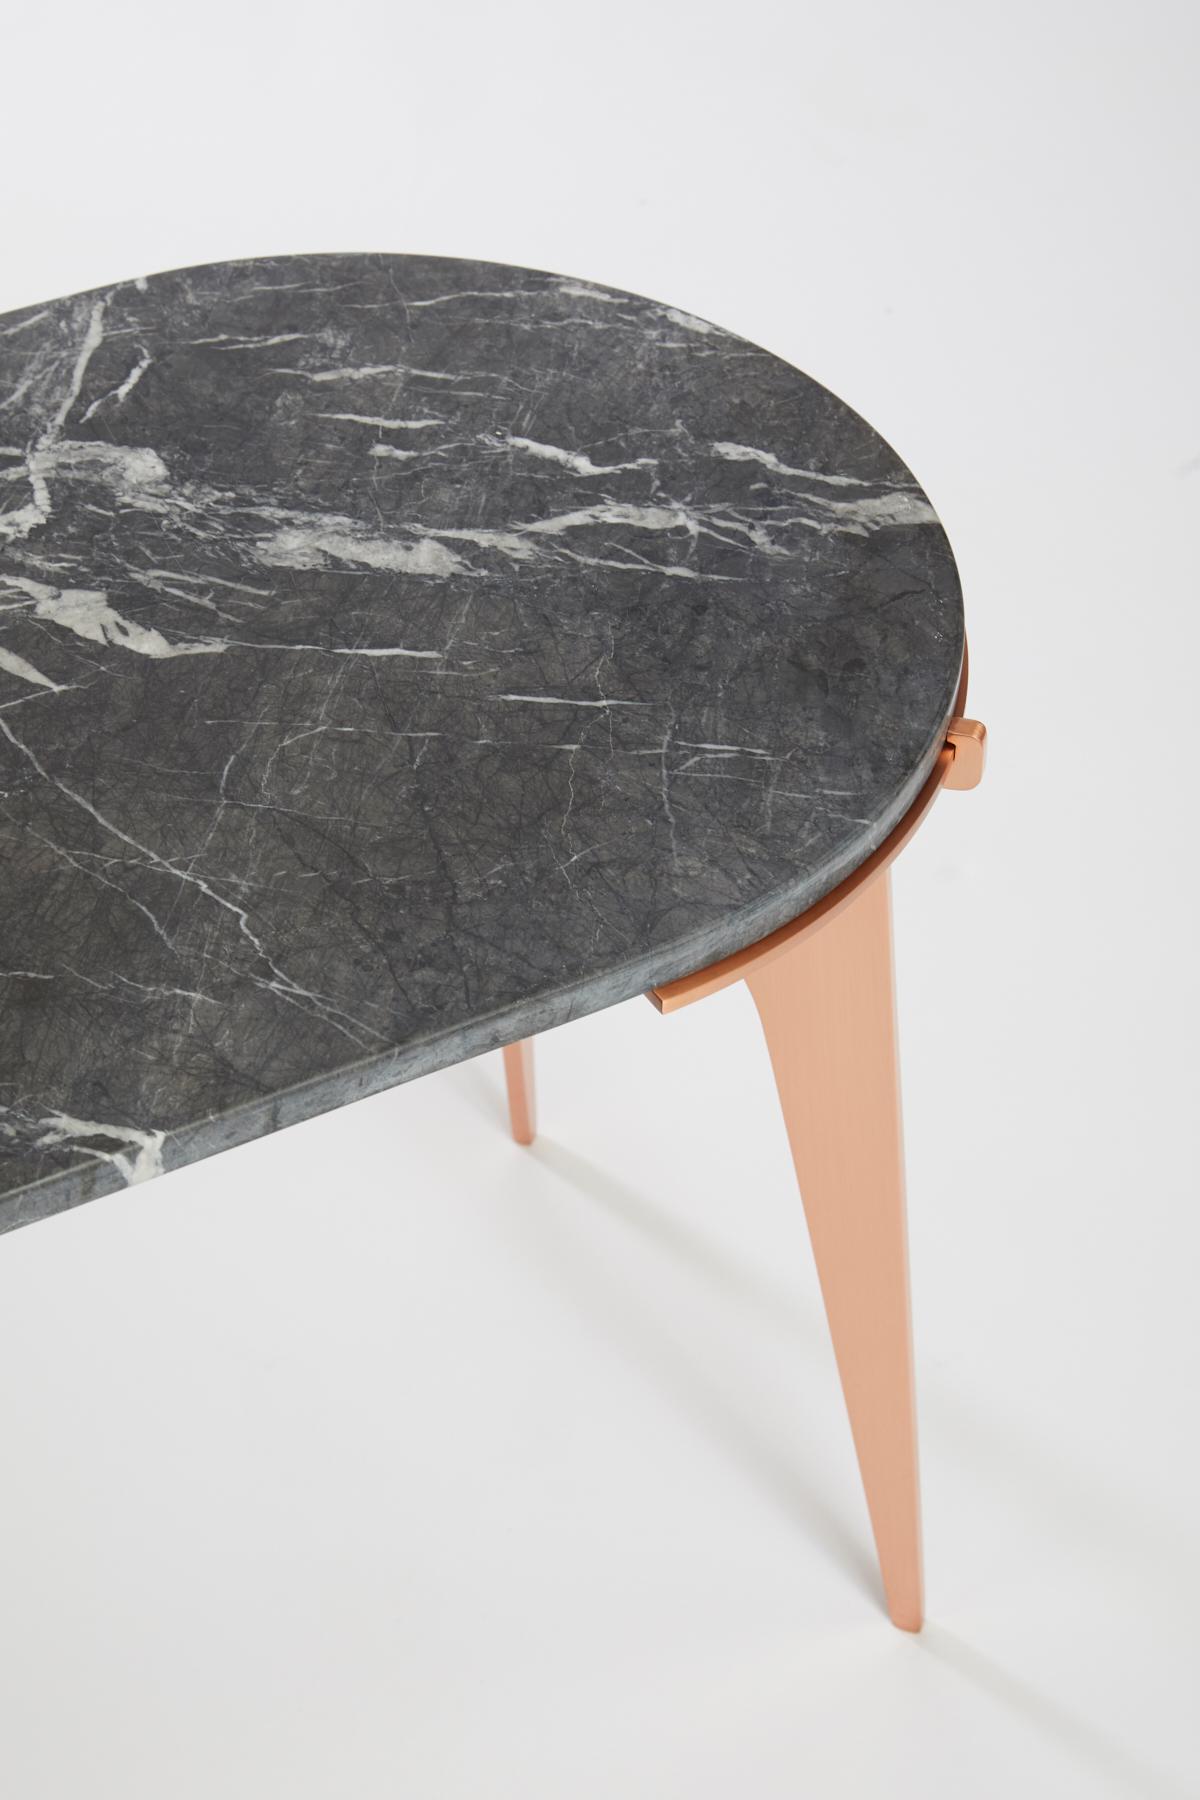 Black (Grigio Carnico - Black Stone) Prong Racetrack Side Table in Satin Copper Base with Marble Top by Gabriel Scott 5